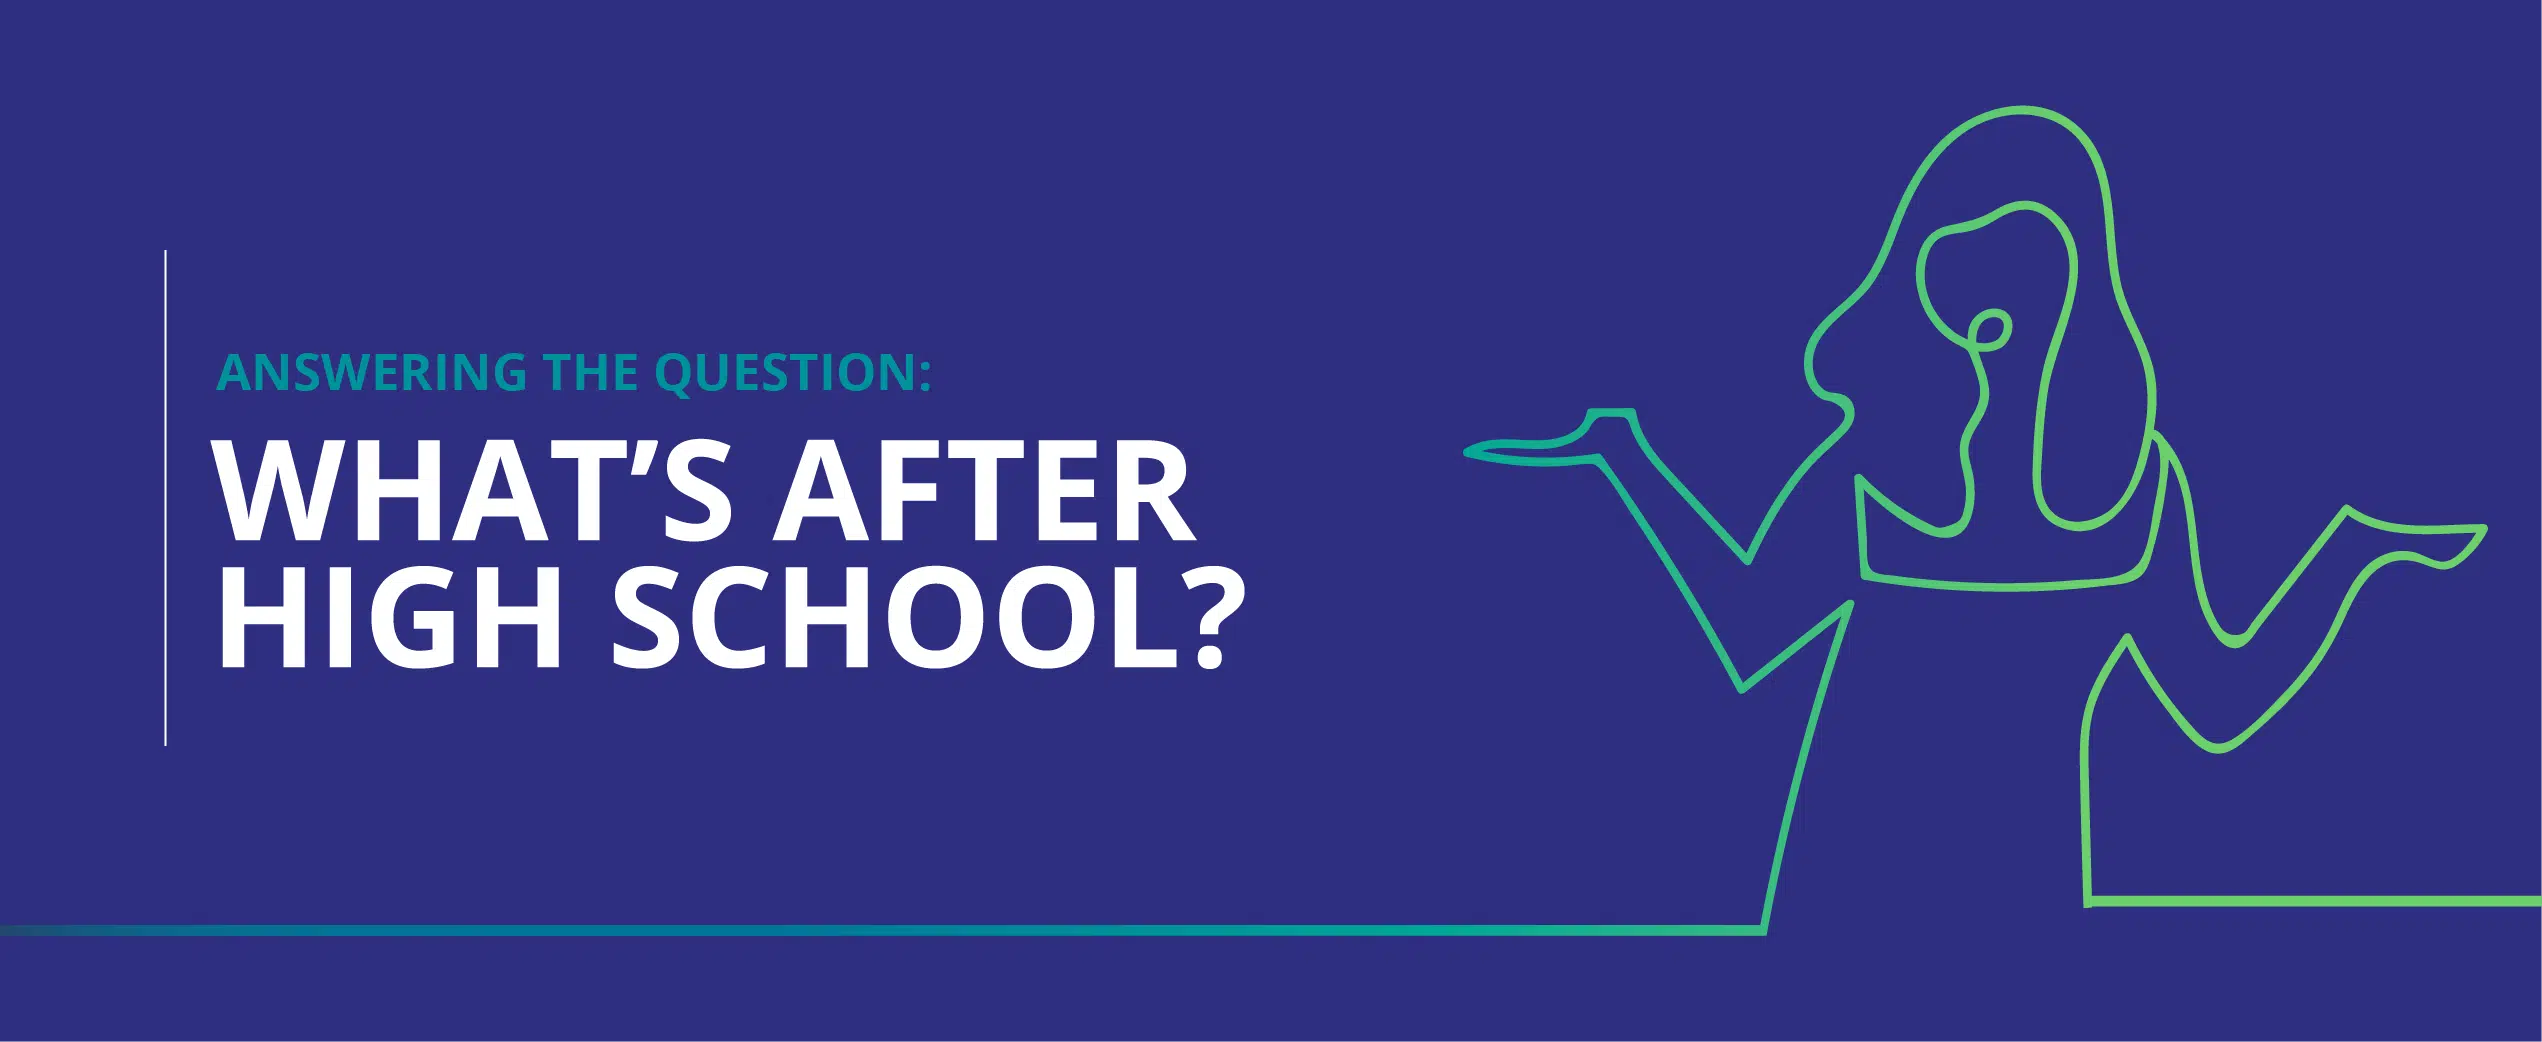 Answering the Question: What’s After High School?